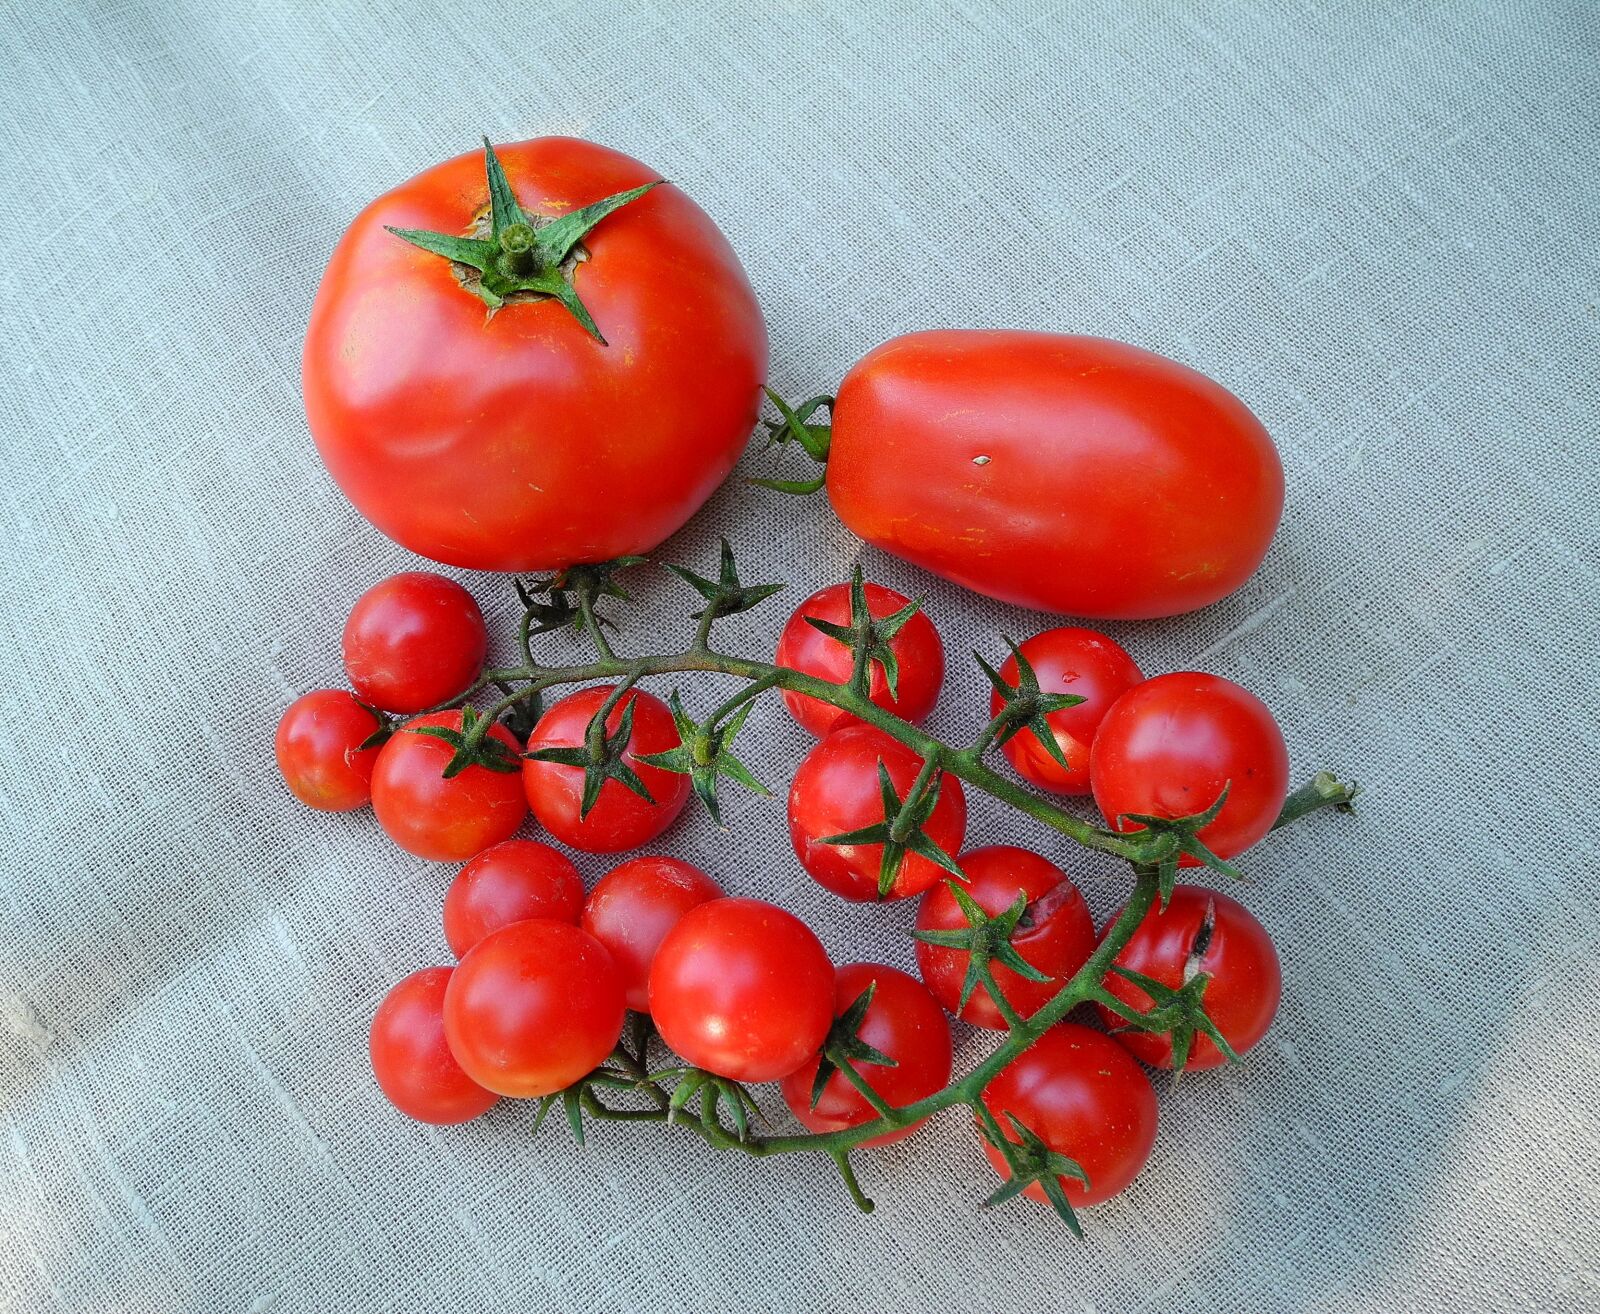 Nikon Coolpix P7000 sample photo. Tomatoes, vegetables, red photography